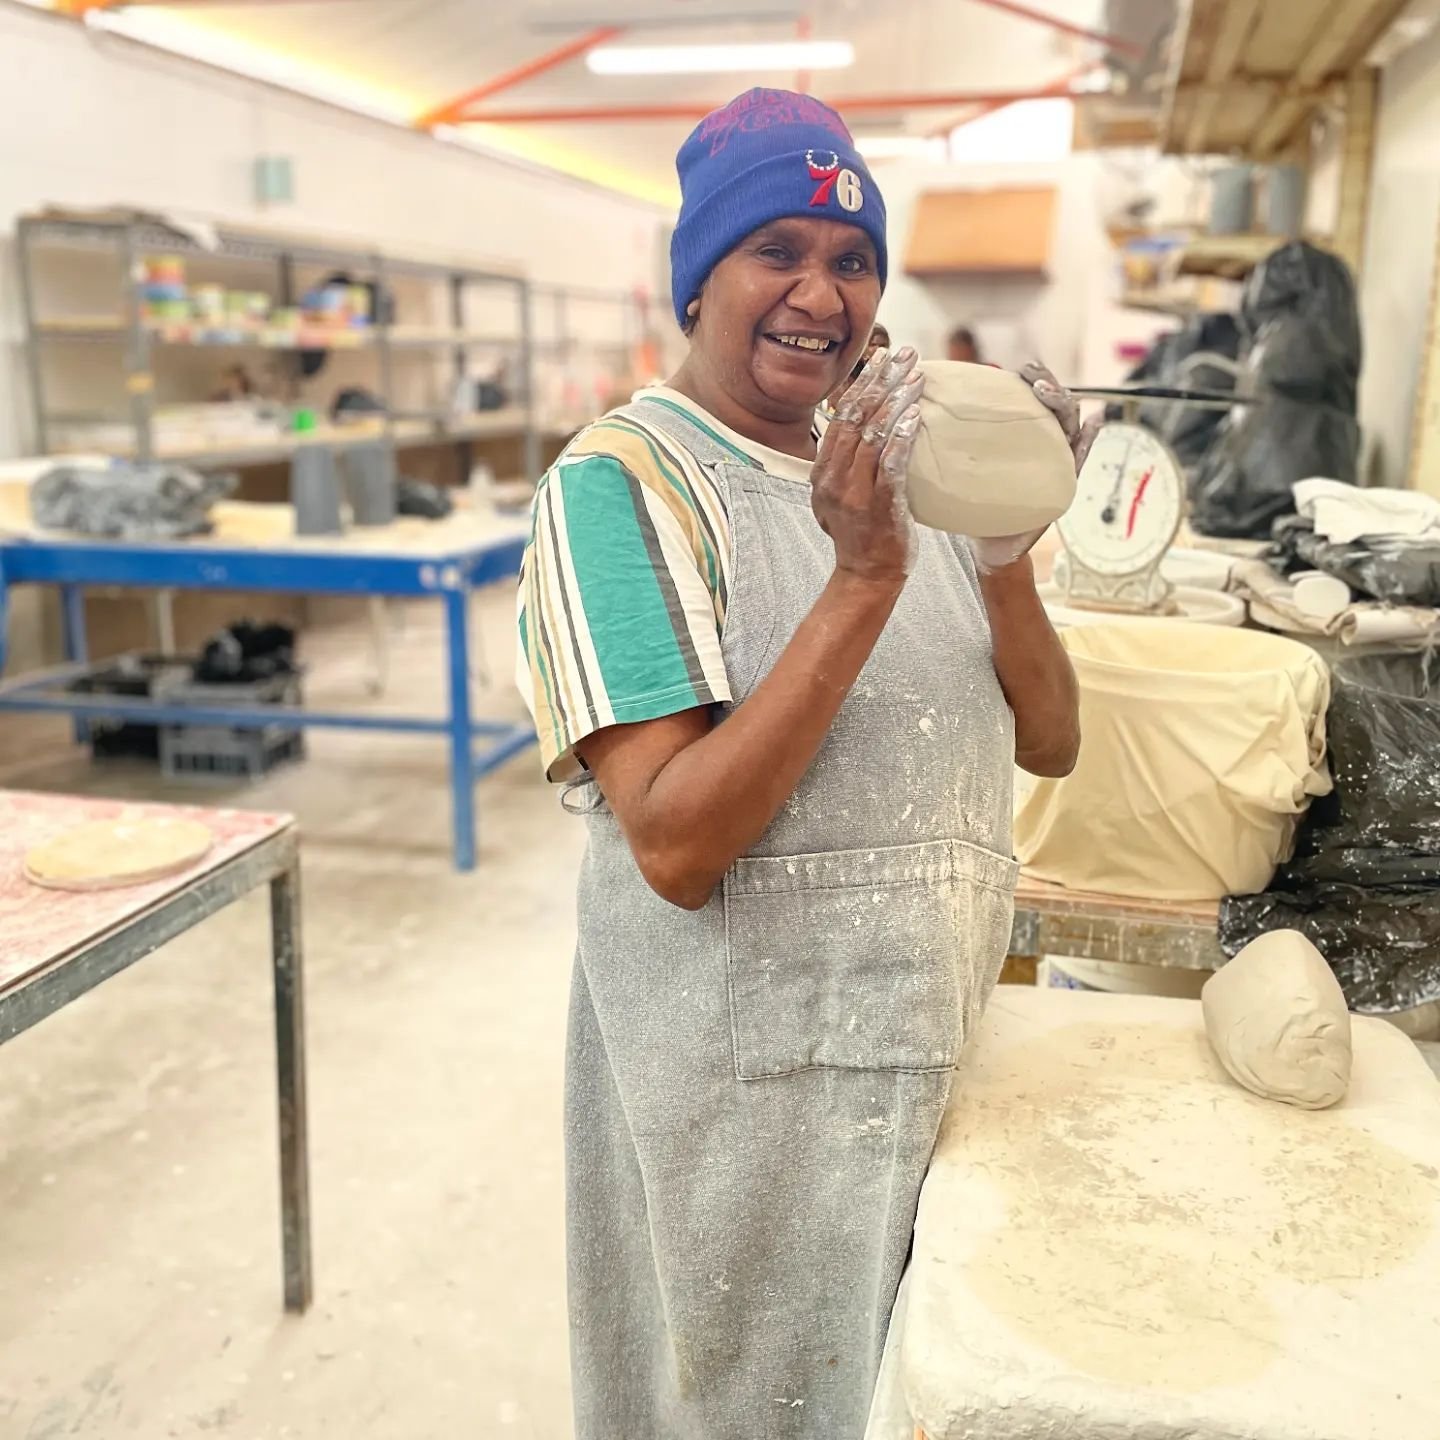 Arts Worker Natasha Carroll demonstrating her new skill of cut wedging. This technique recycles and blends clay so that it can be reused by artists in the ceramic studio.

#ivais #ernabella #ernabellaarts #clay #apylands #ceramics #pukatja #madebyhan